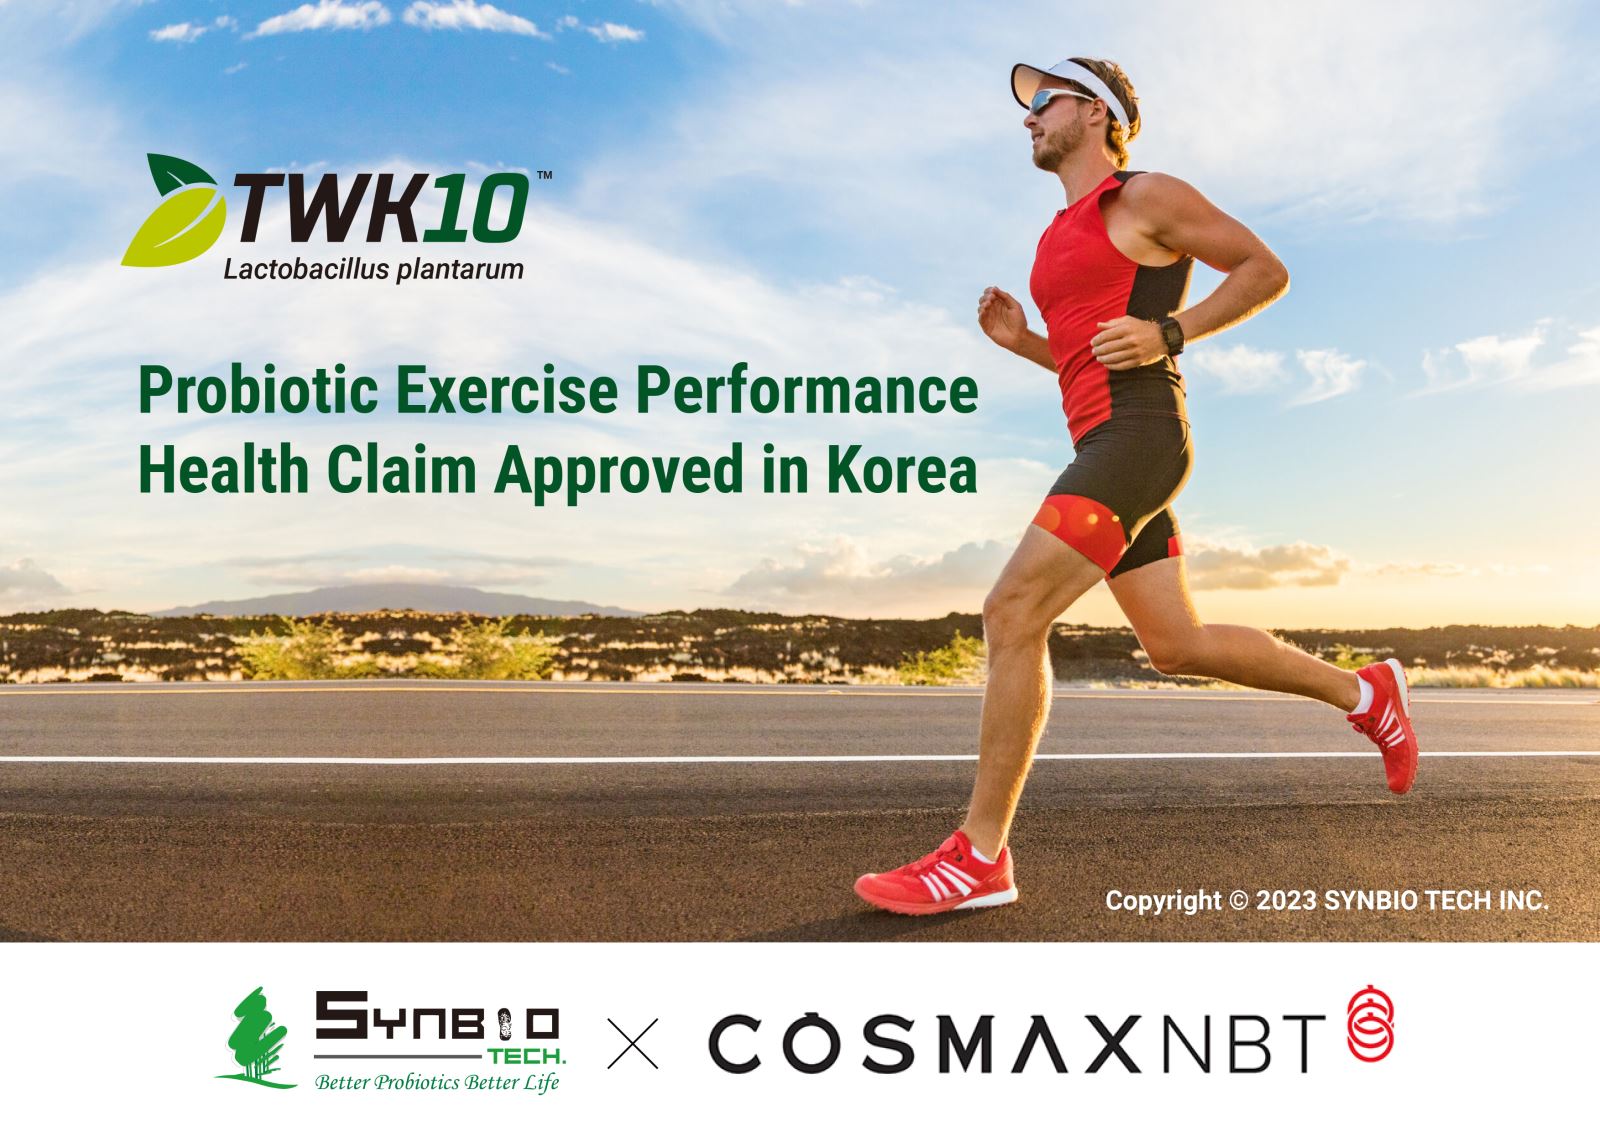 Synbio Tech Inc. and Cosmax Group signed an exclusive cooperation agreement to jointly expand the South Korean probiotics market